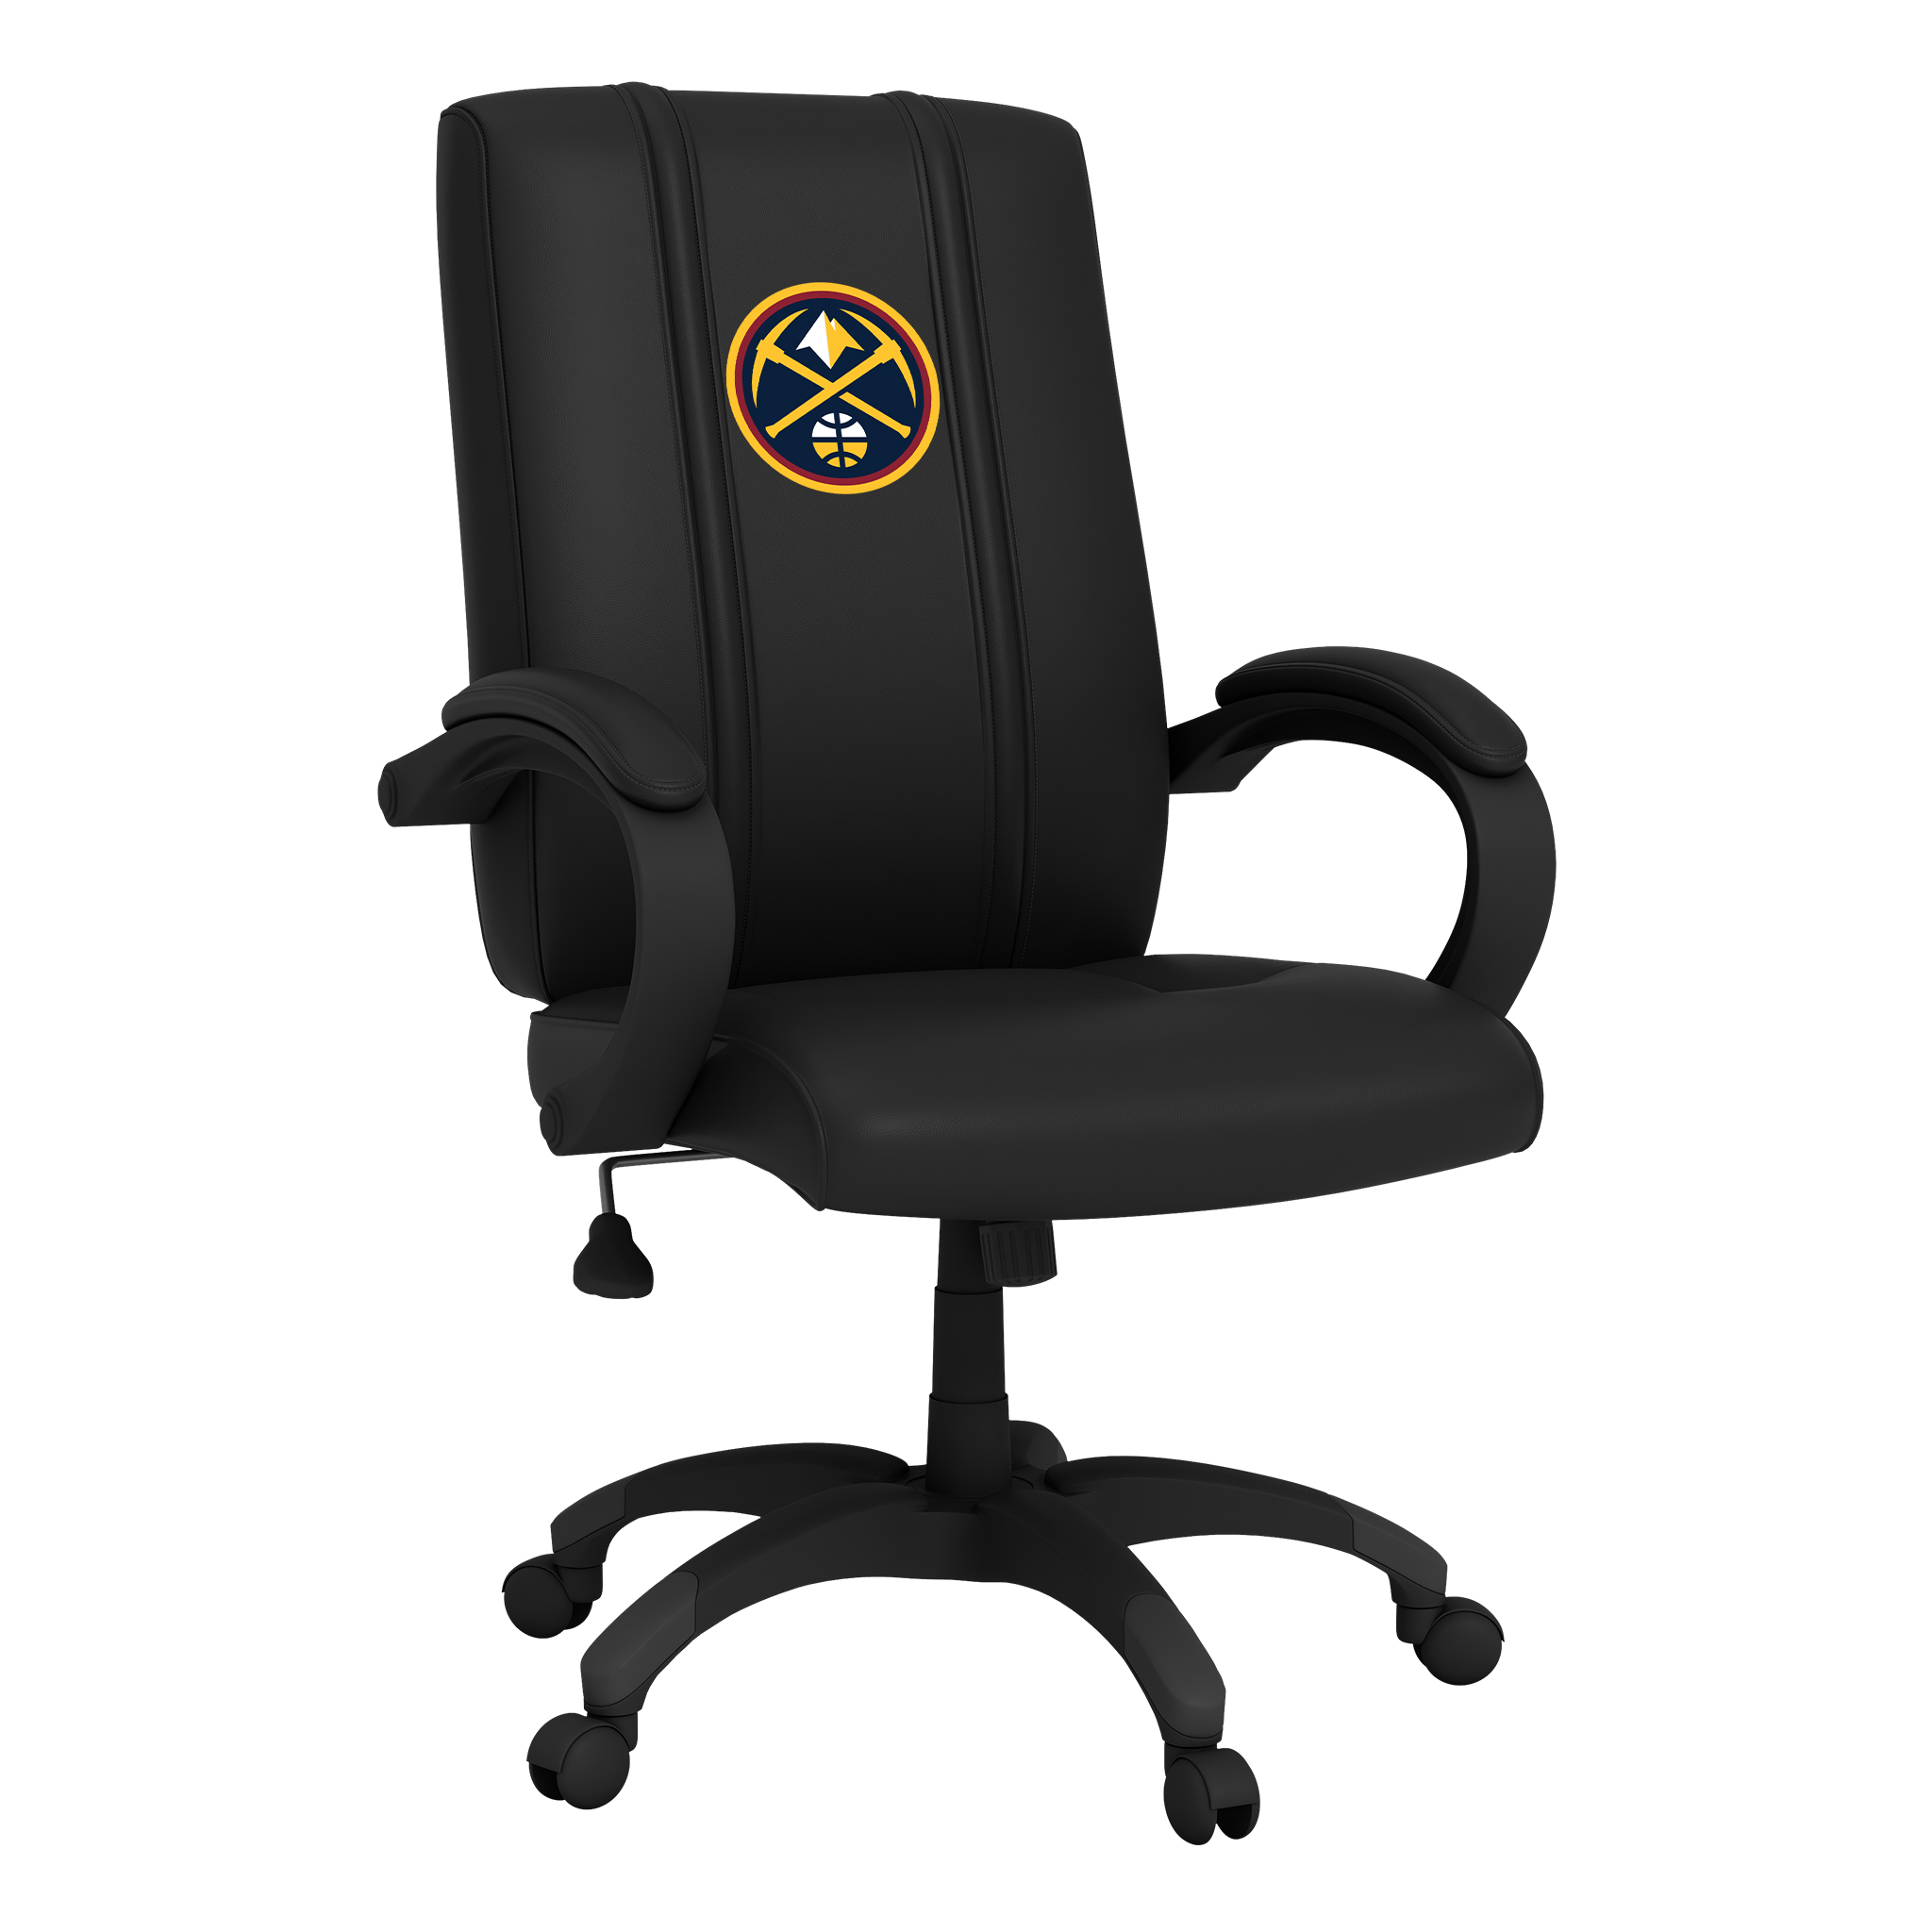 Denver Nuggets Office Chair 1000 with Denver Nuggets Logo